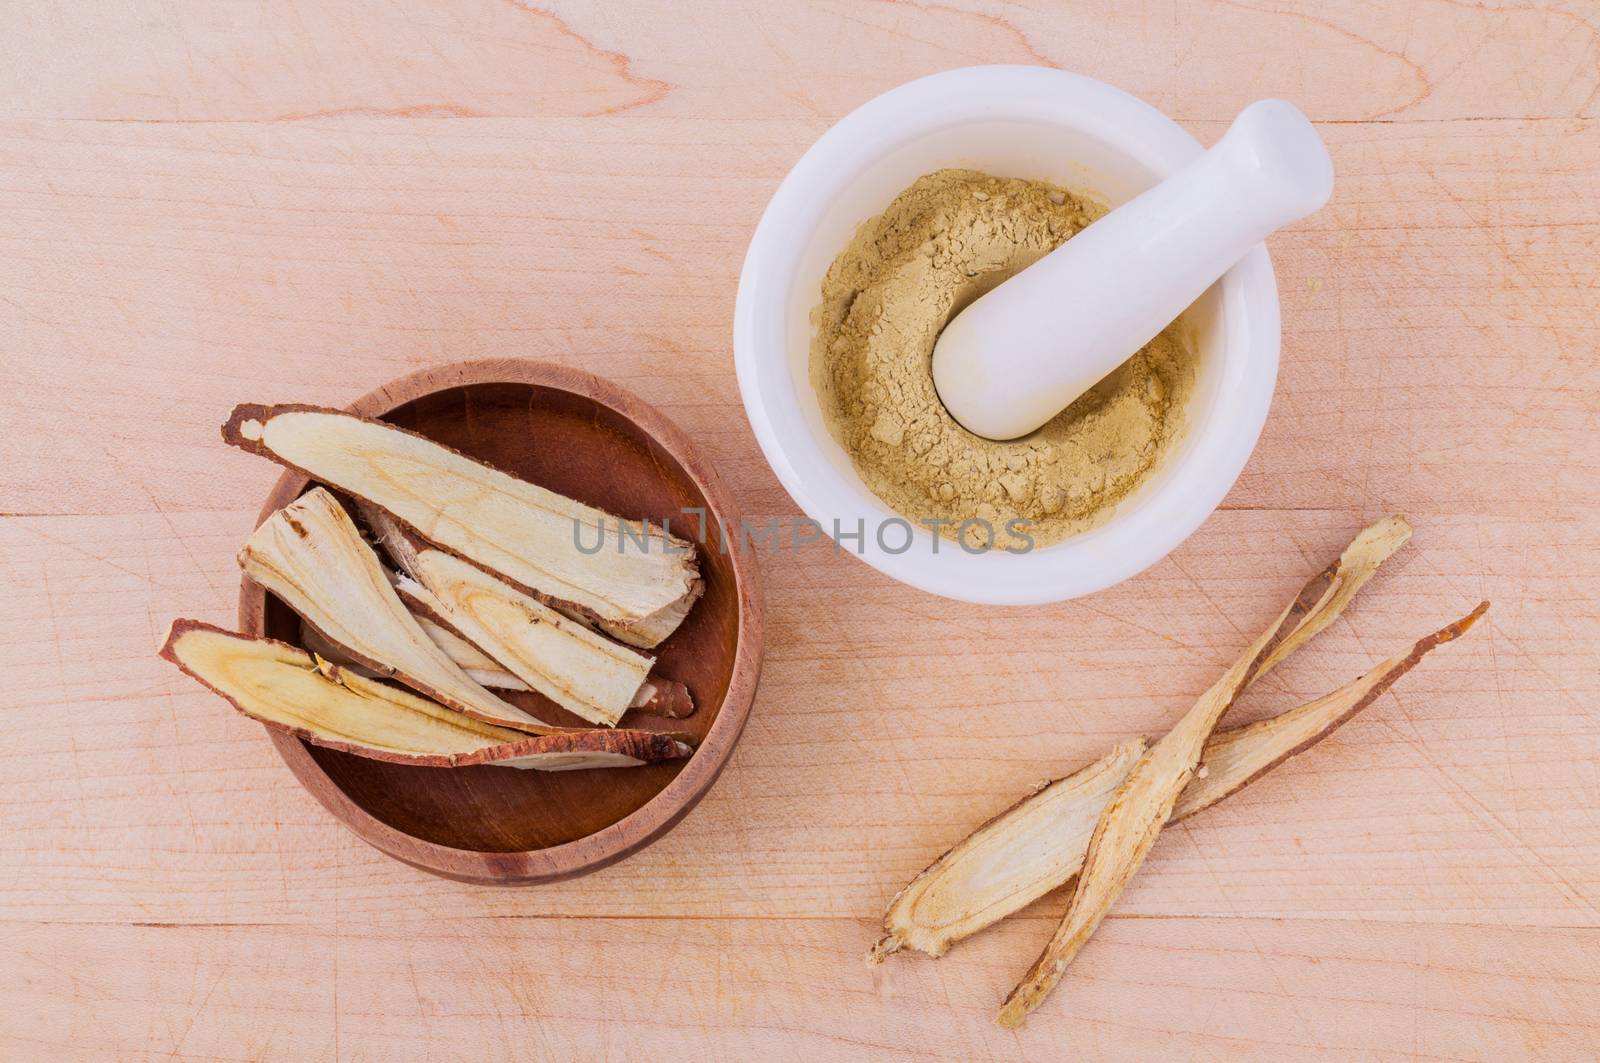 Licorice herbal medicine including powder, chopped and sliced root and mortar on wooden table